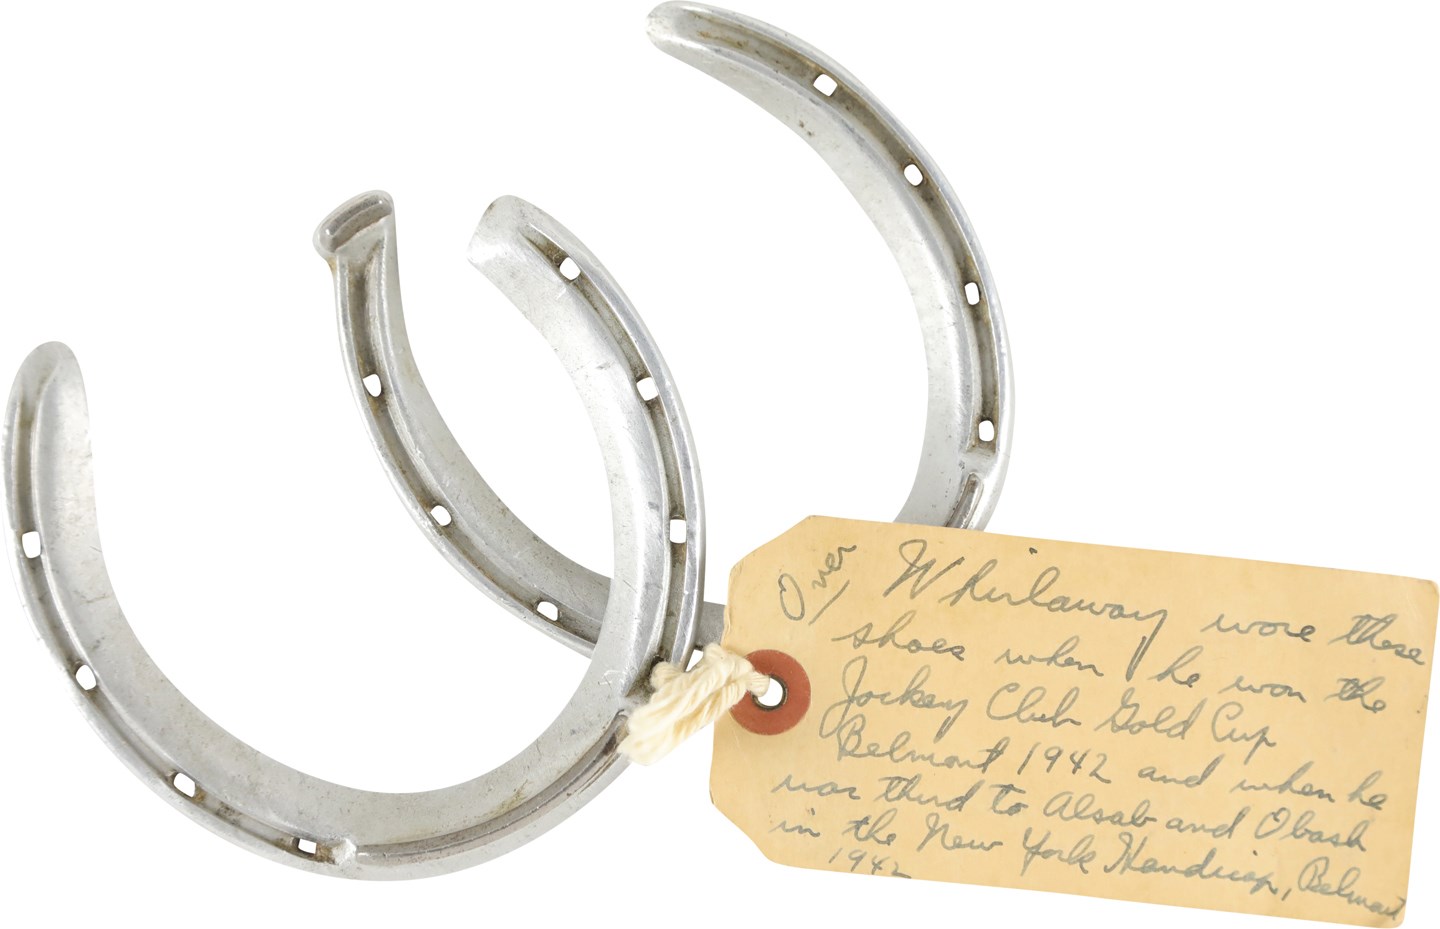 - 1942 Whirlaway Horseshoes from Jockey Club Gold Cup Victory and New York Handicap Races